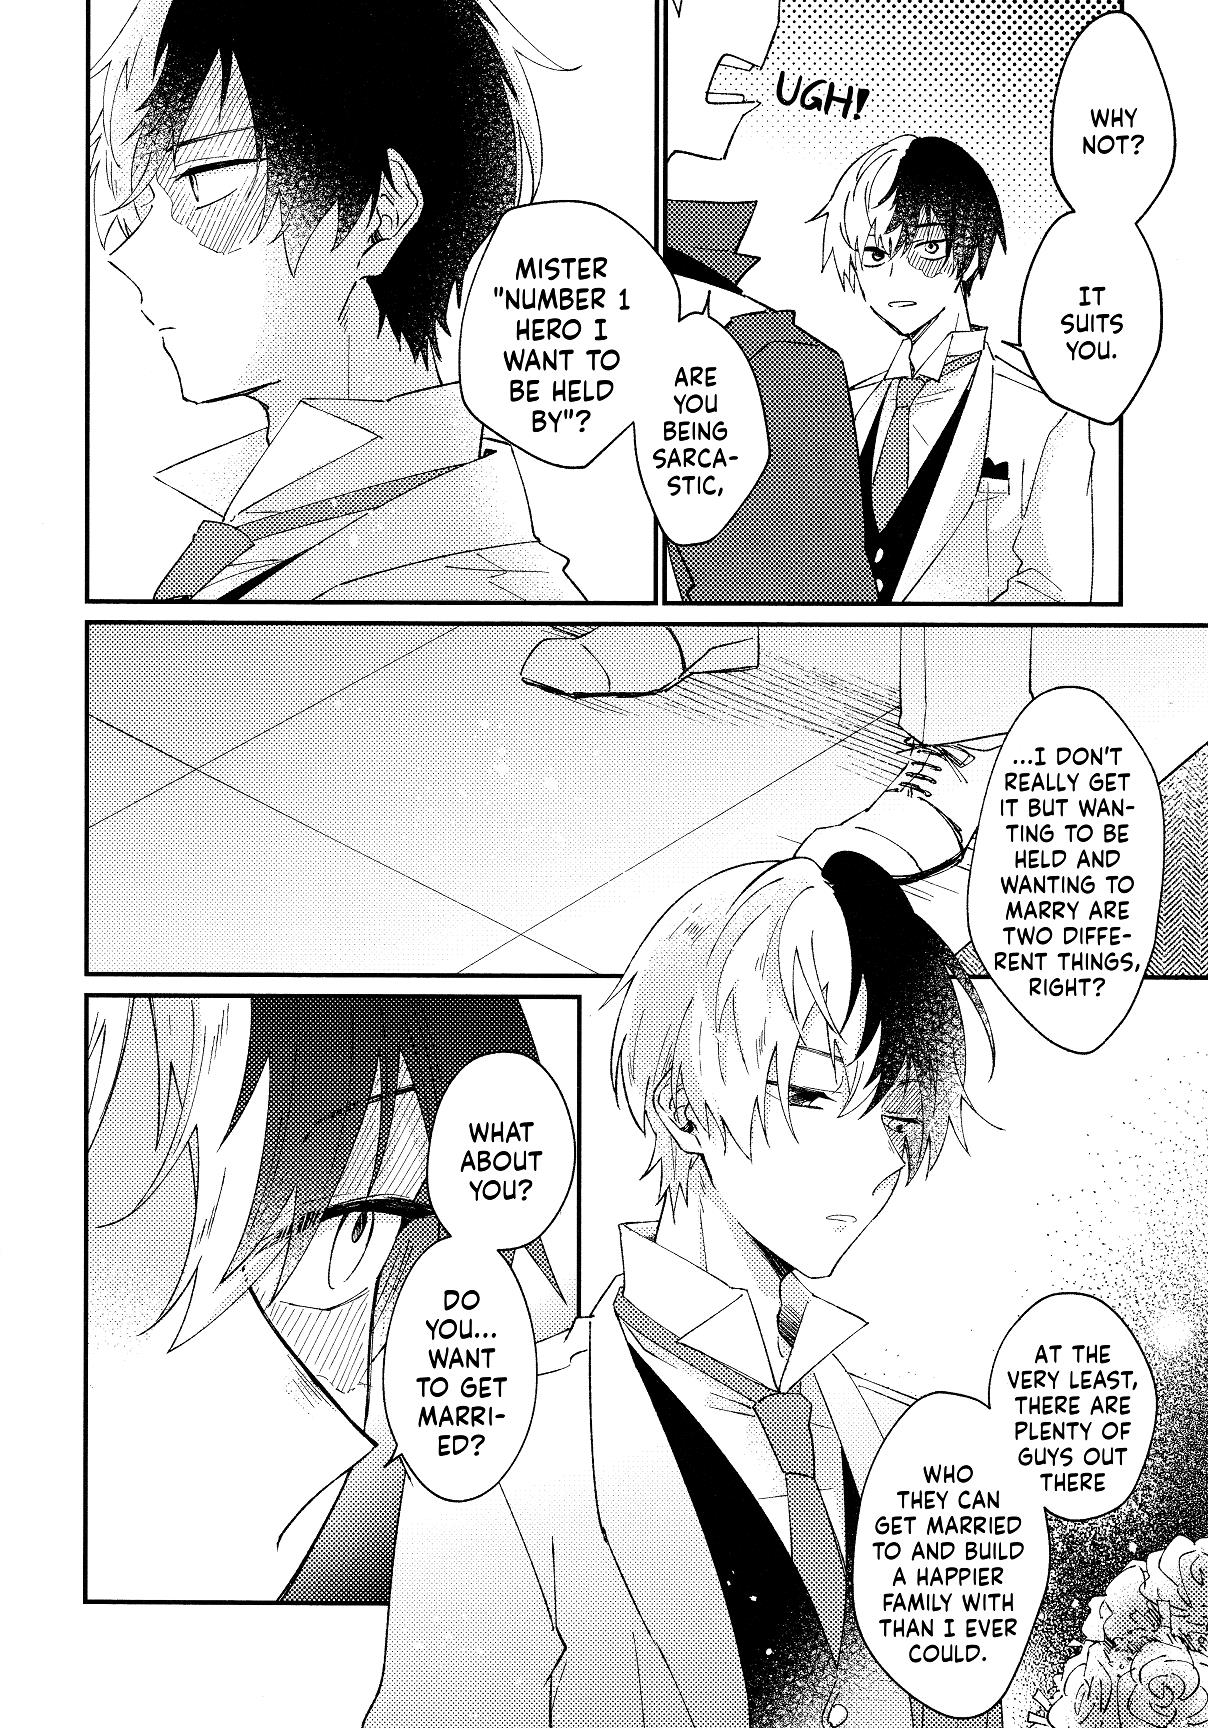 Cheers! - Shouto X Katsuki Marriage Anthology Vol.1 Chapter 10: That's The Only Reason - Picture 3